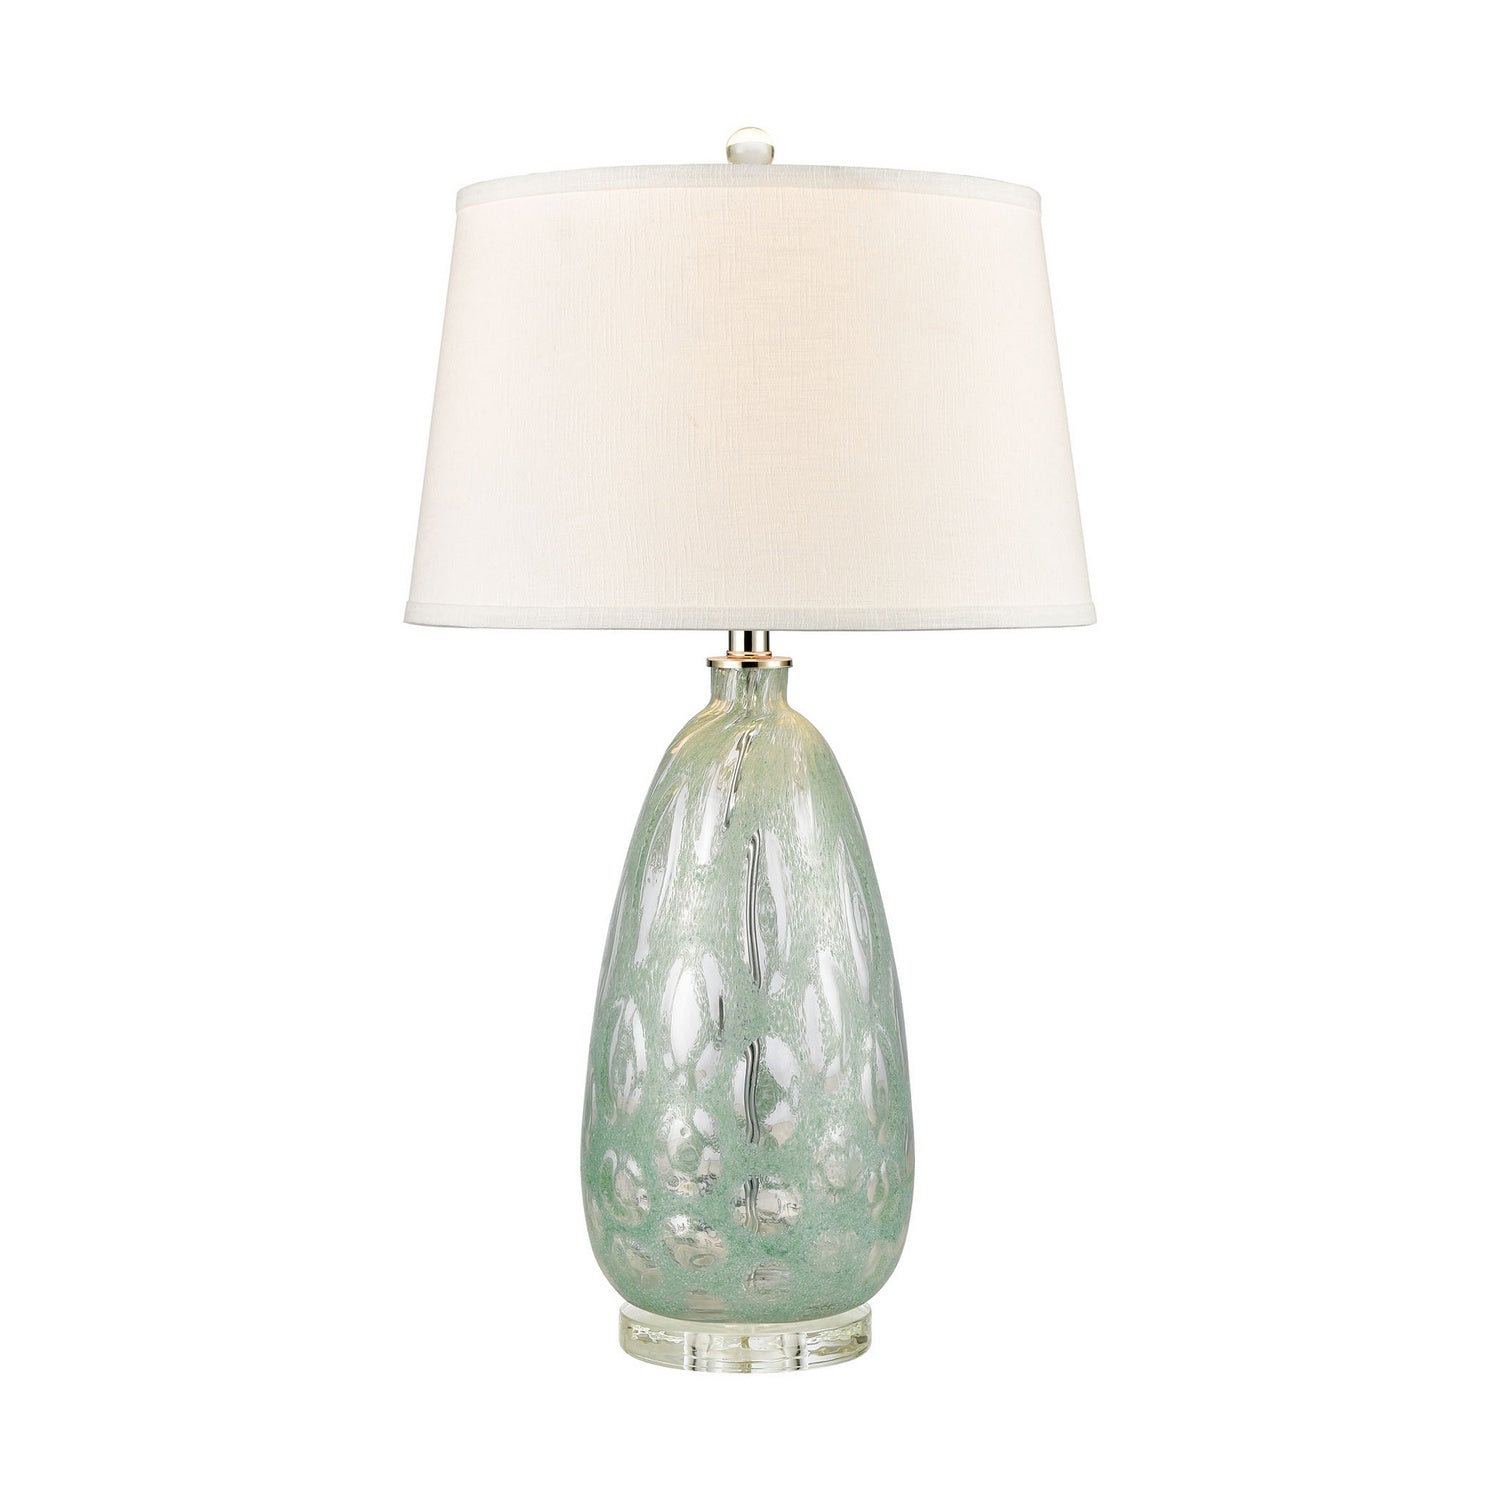 ELK Home - D4708 - One Light Table Lamp - Bayside Blues - Green